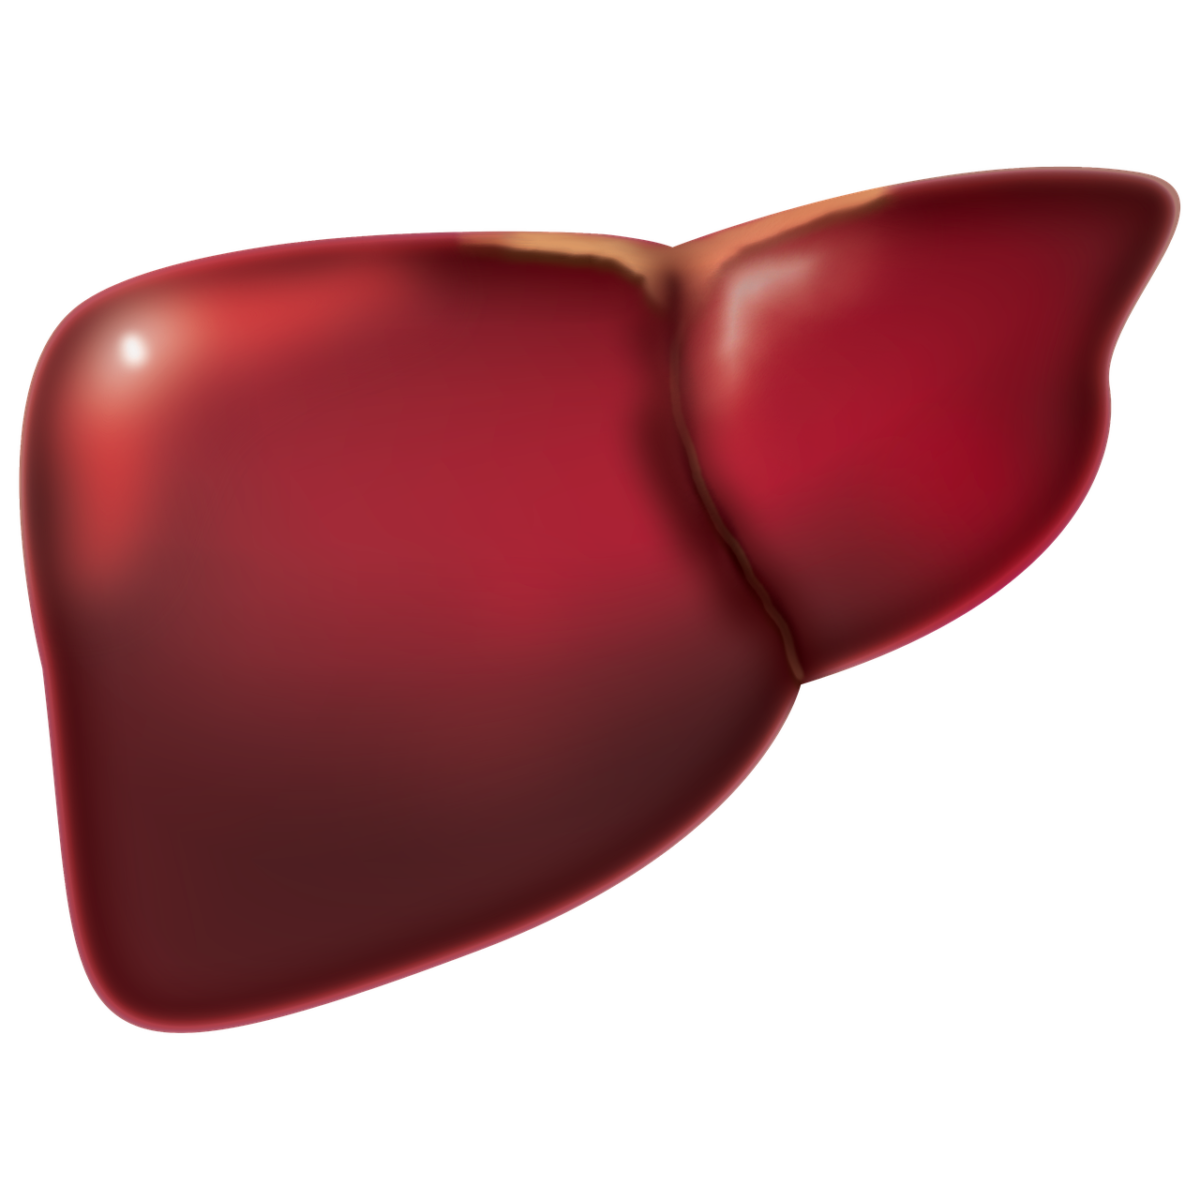 liver-4847972_1280-1200x1200.png